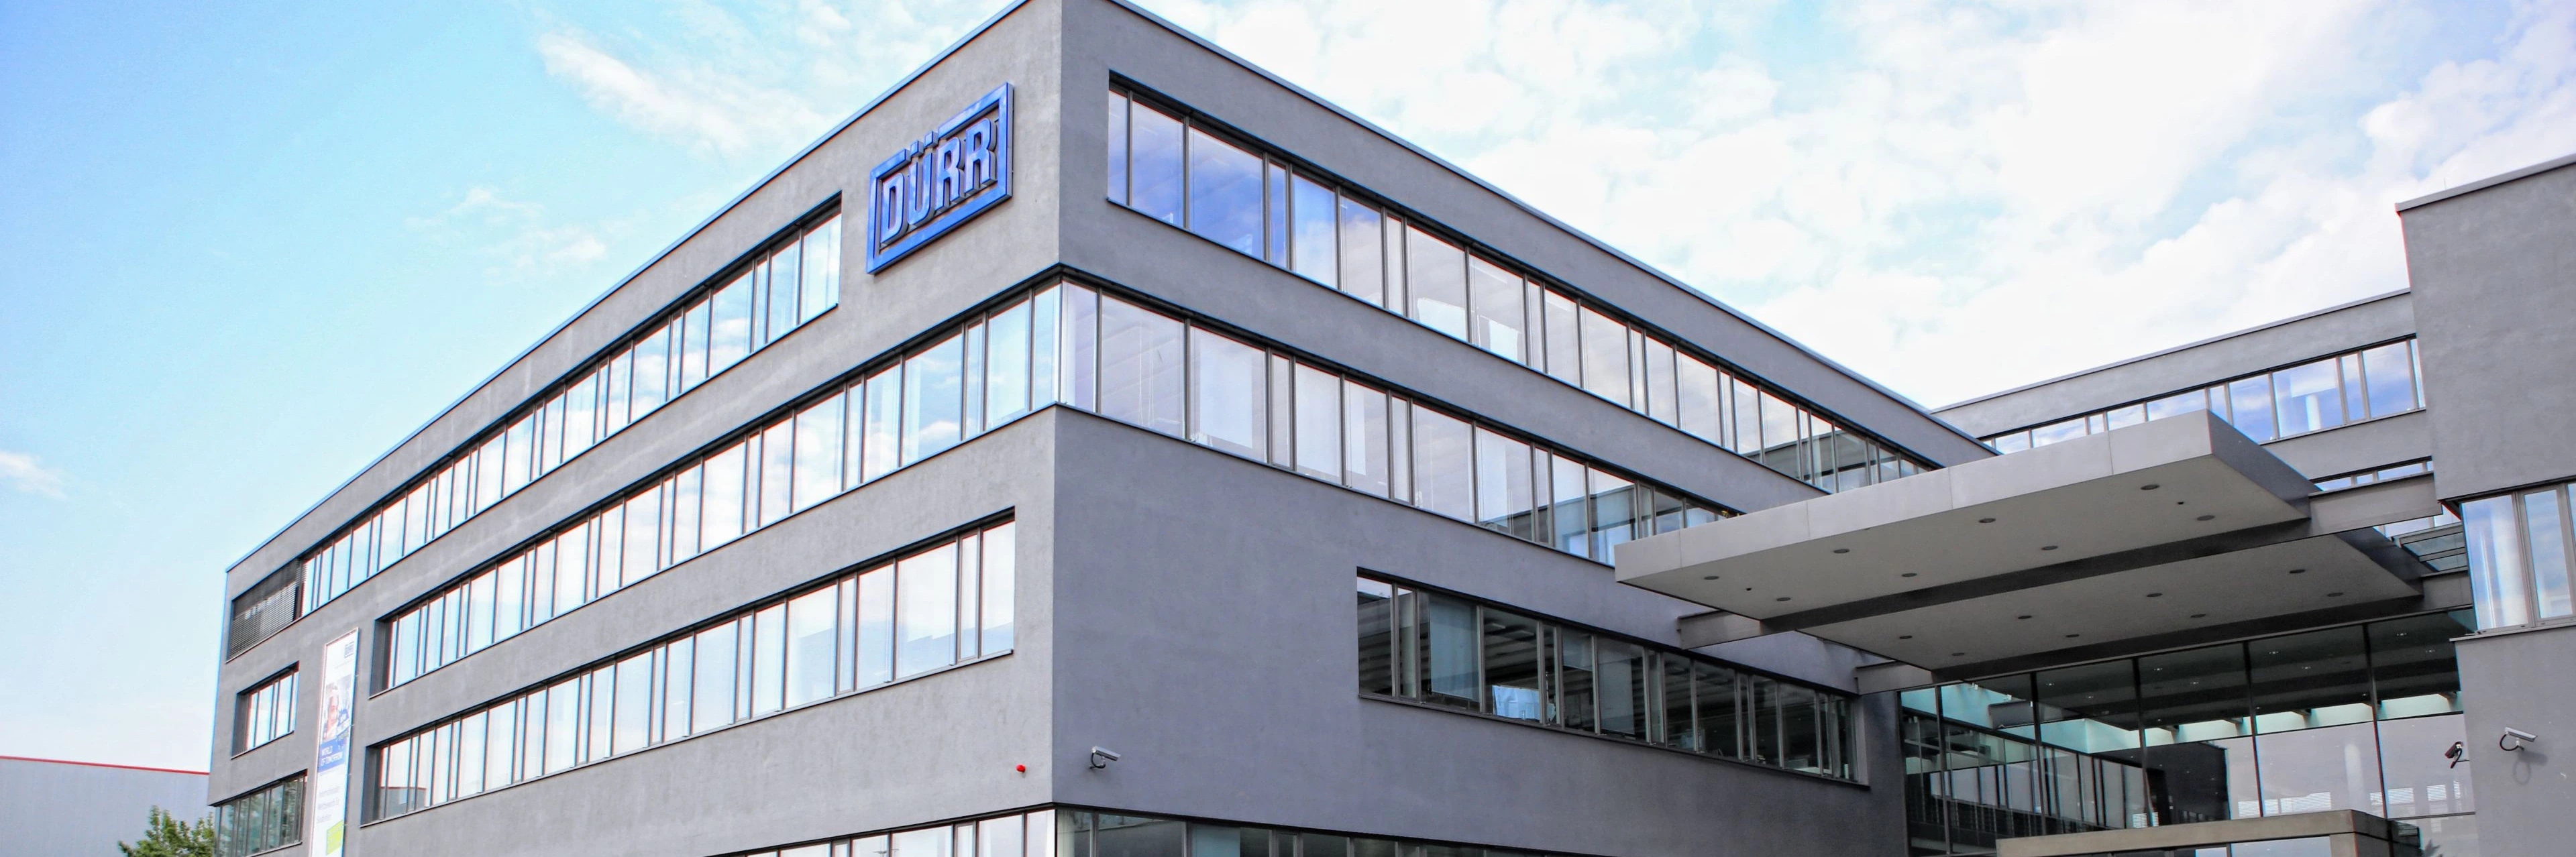 duerr location headquarters in germany